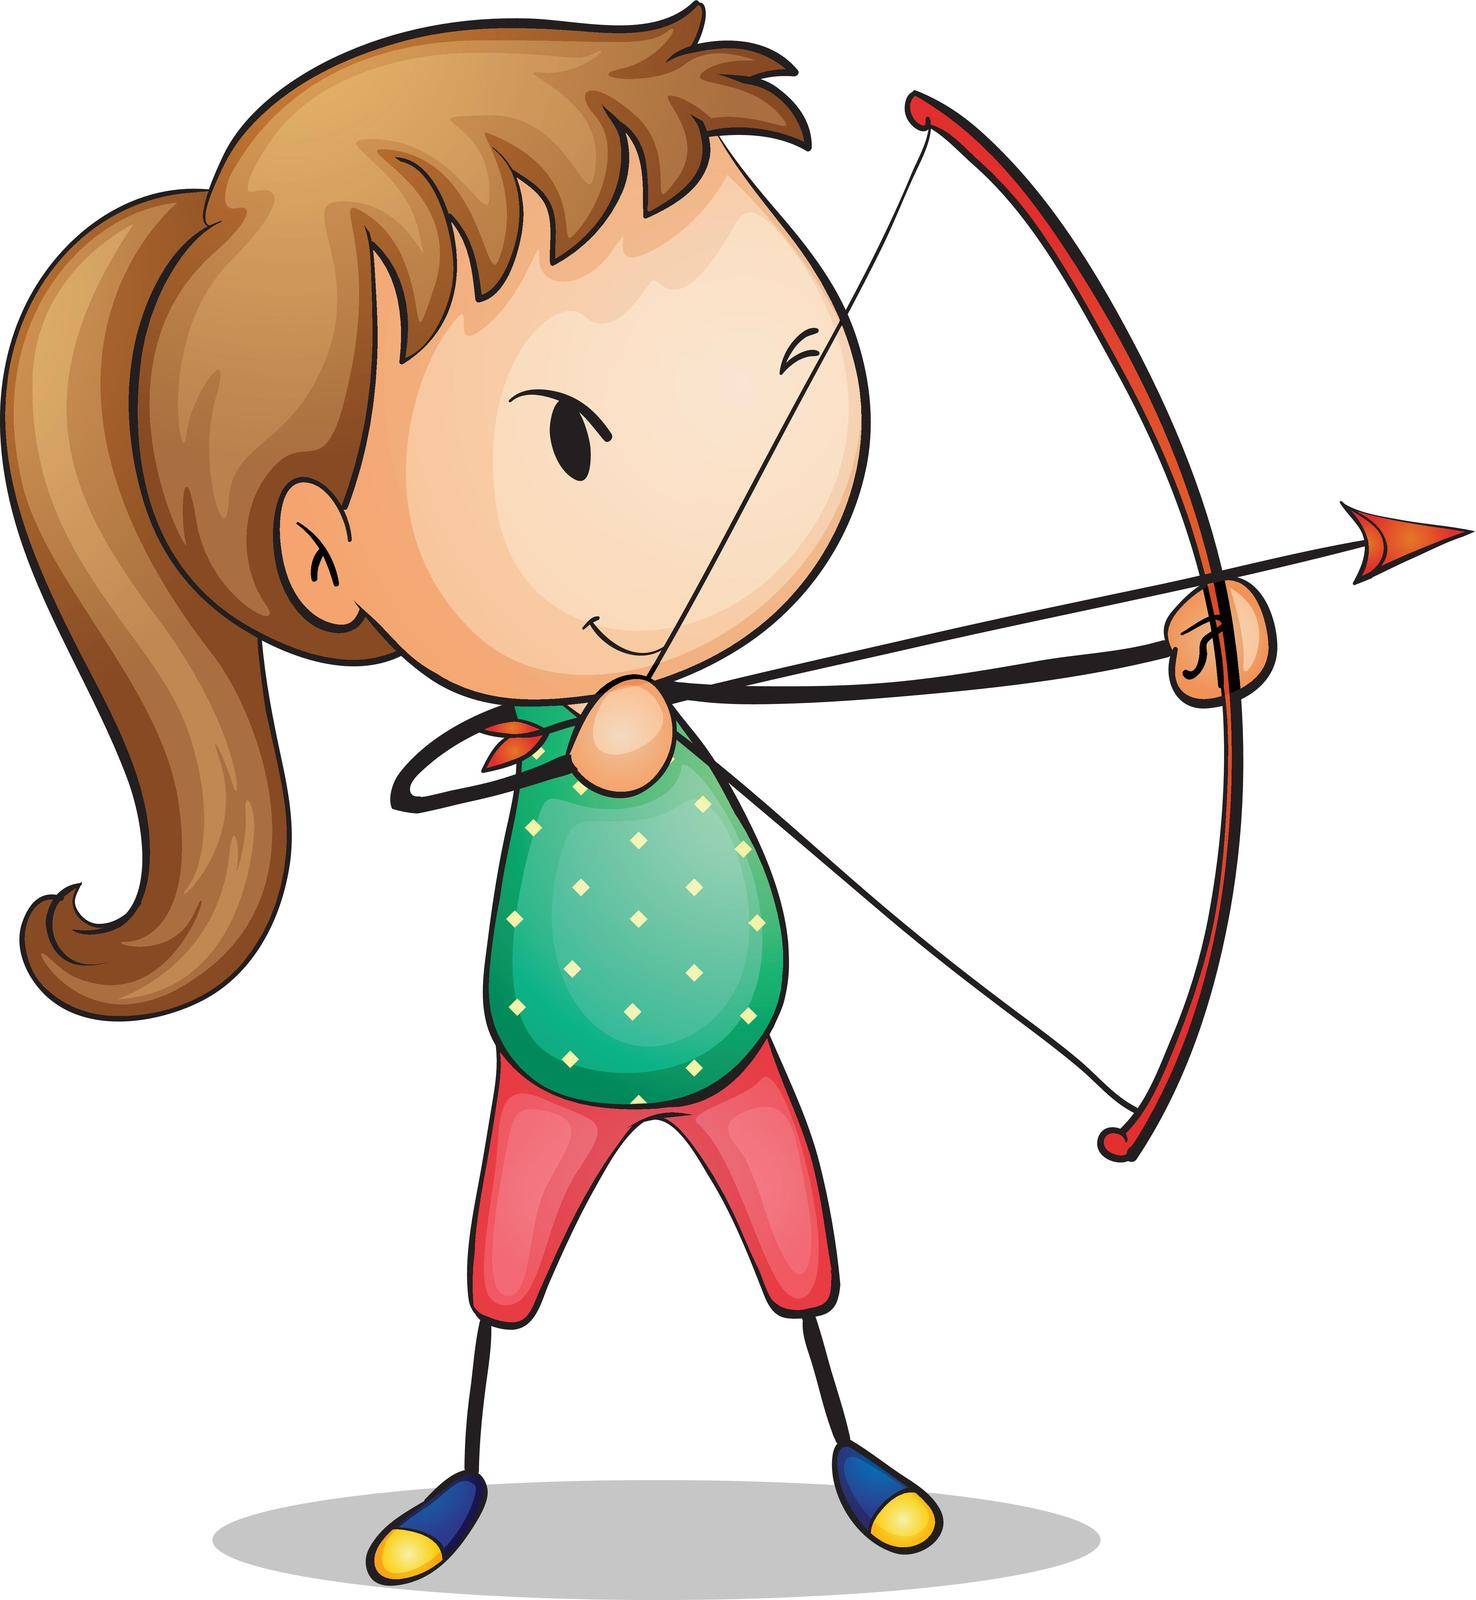 Illustration of a girl with archery set